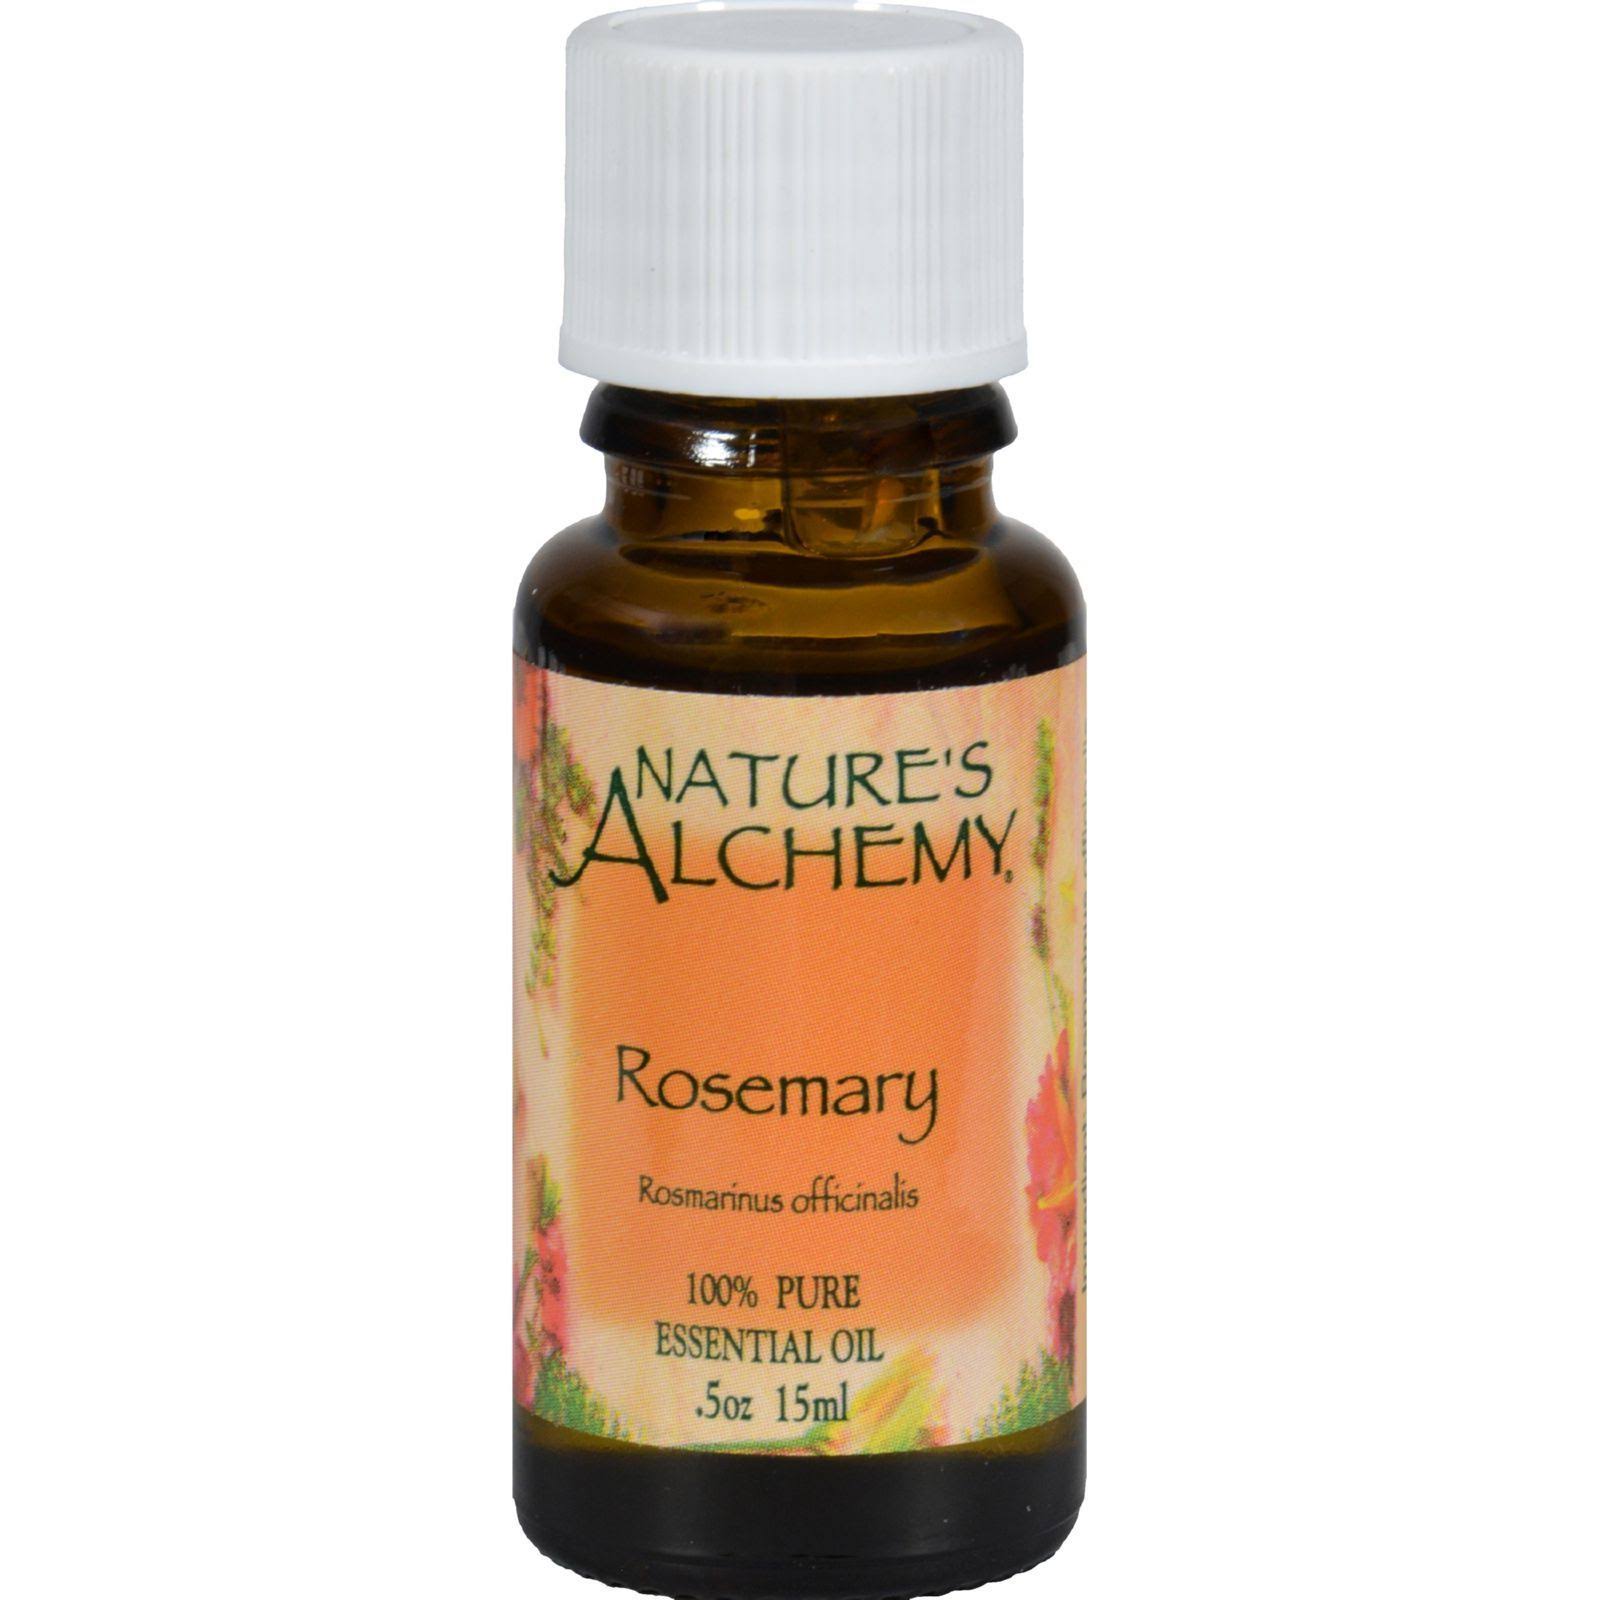 Nature's Alchemy Pure Essential Oil - Rosemary, 0.5oz